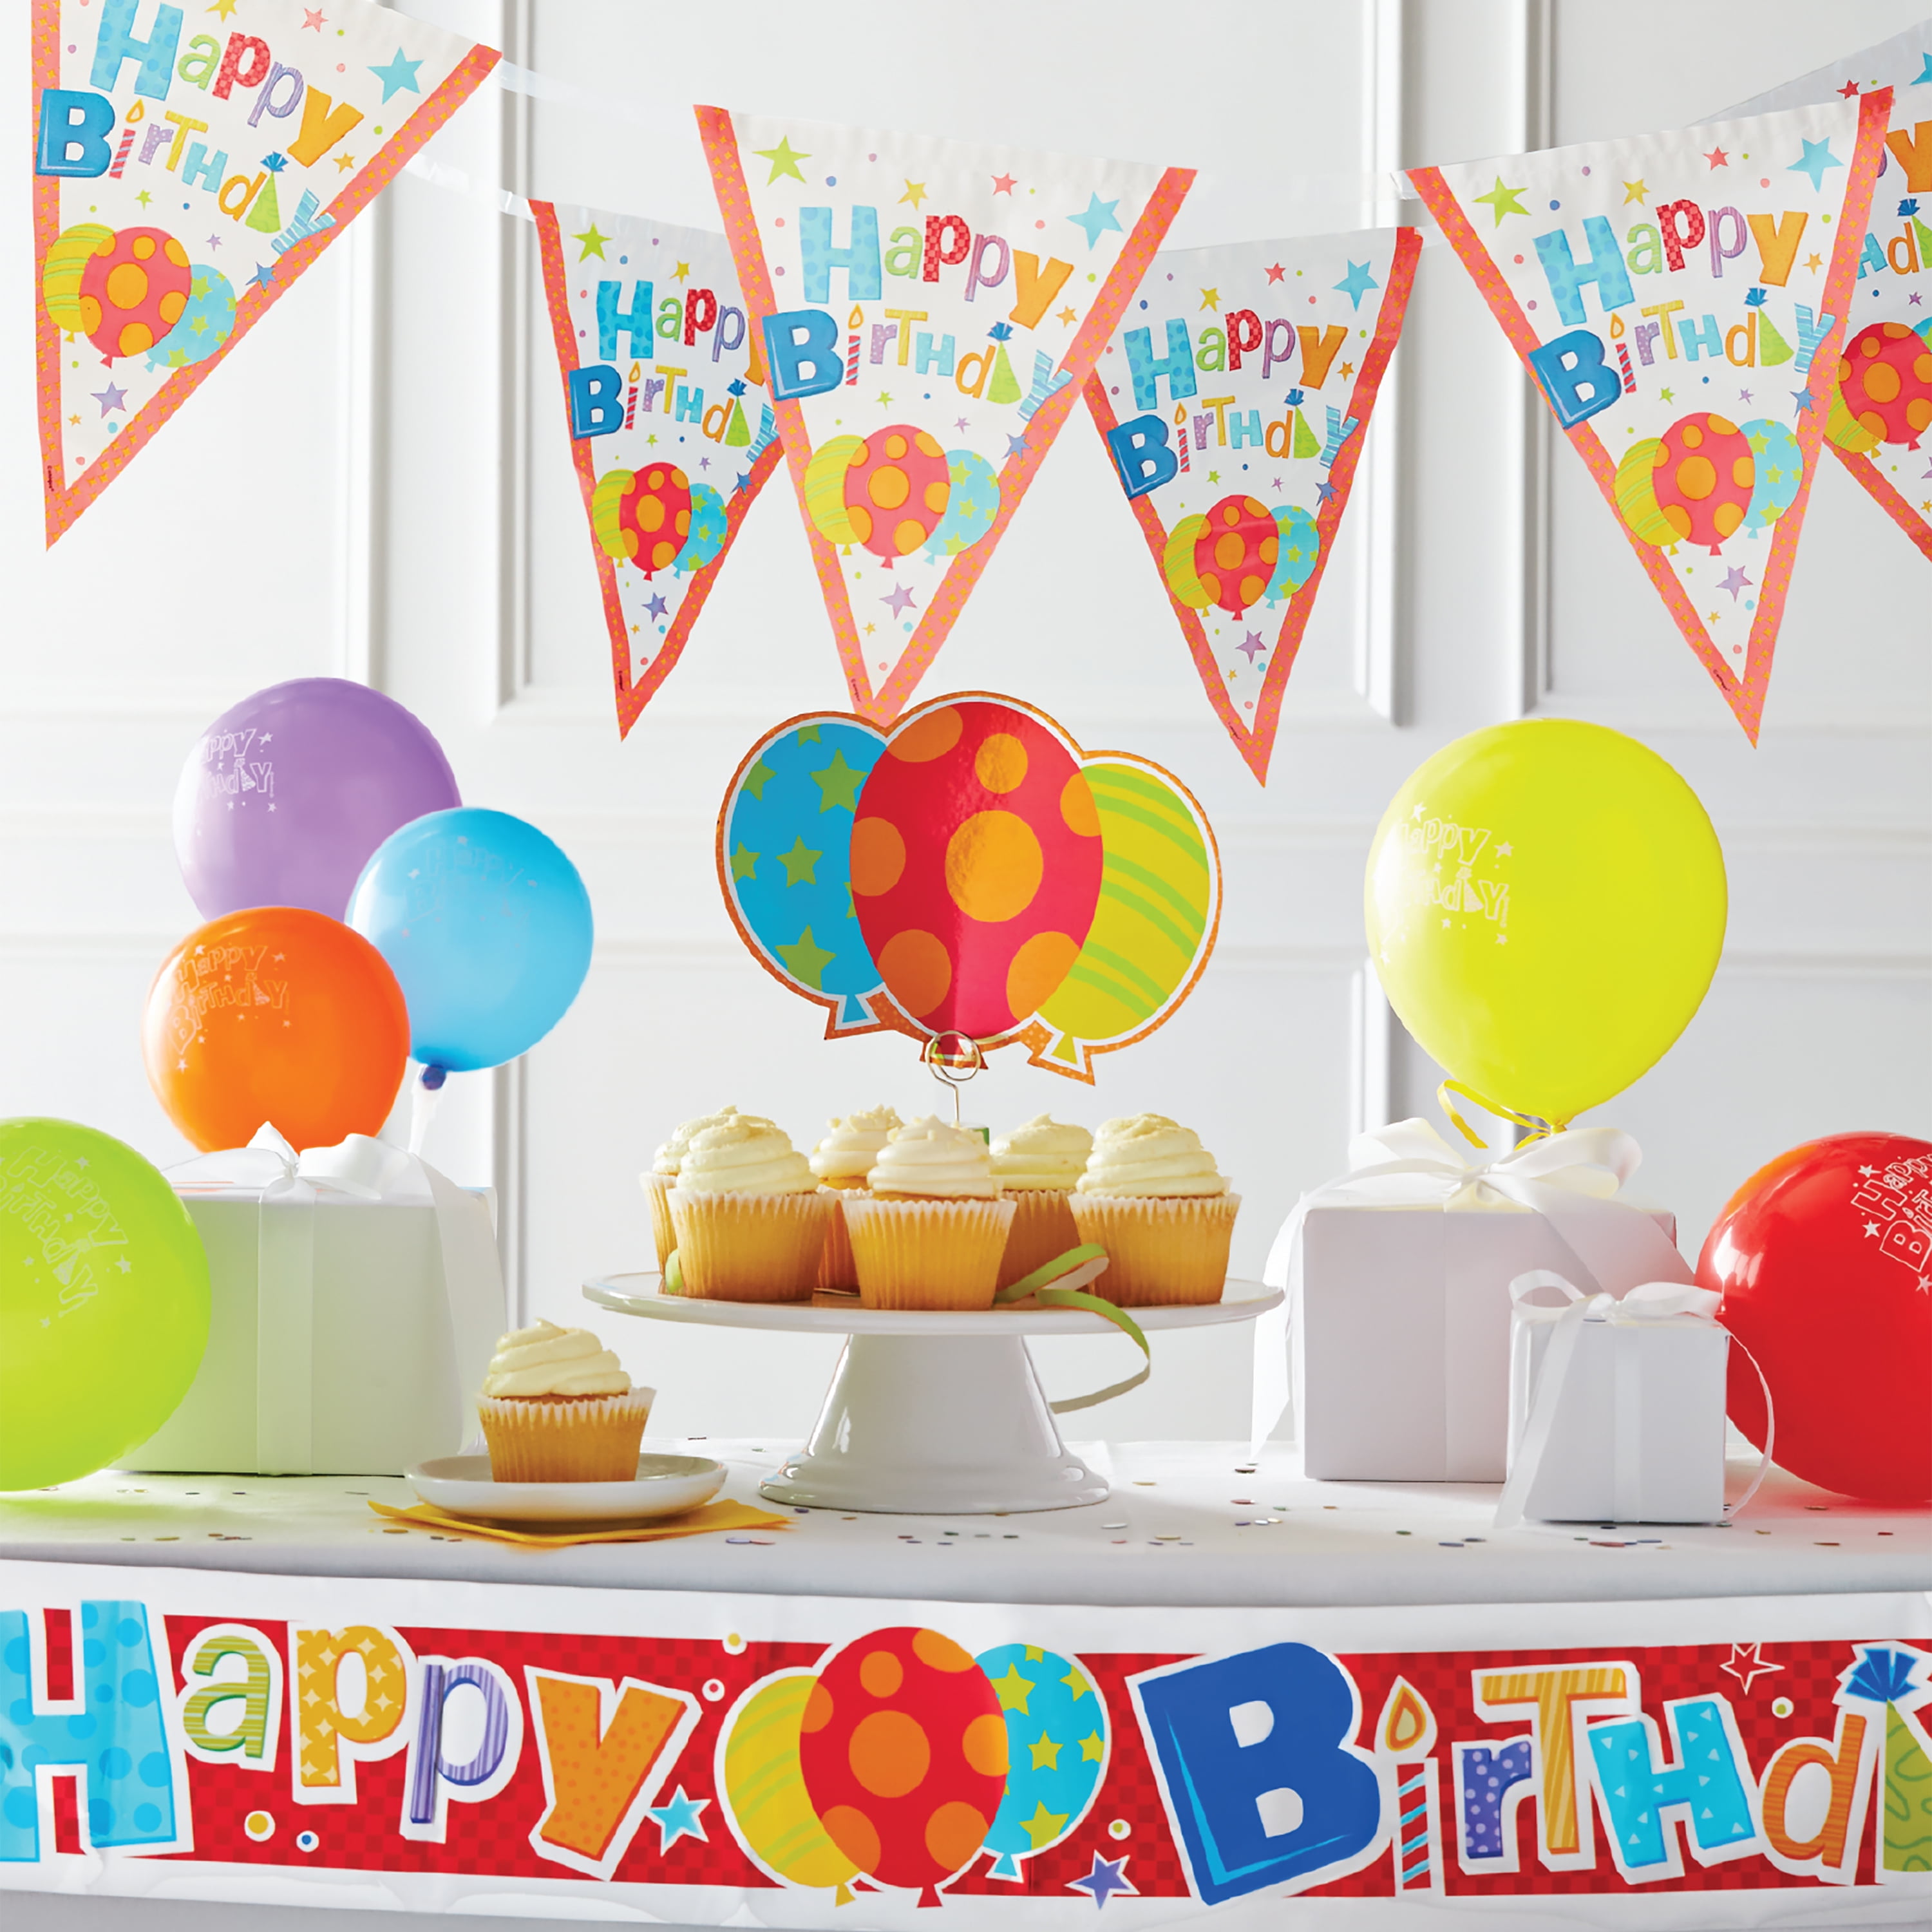 Details about   x2 Personalised Birthday Banner Any Text Image Children Kid Party Decoration 07